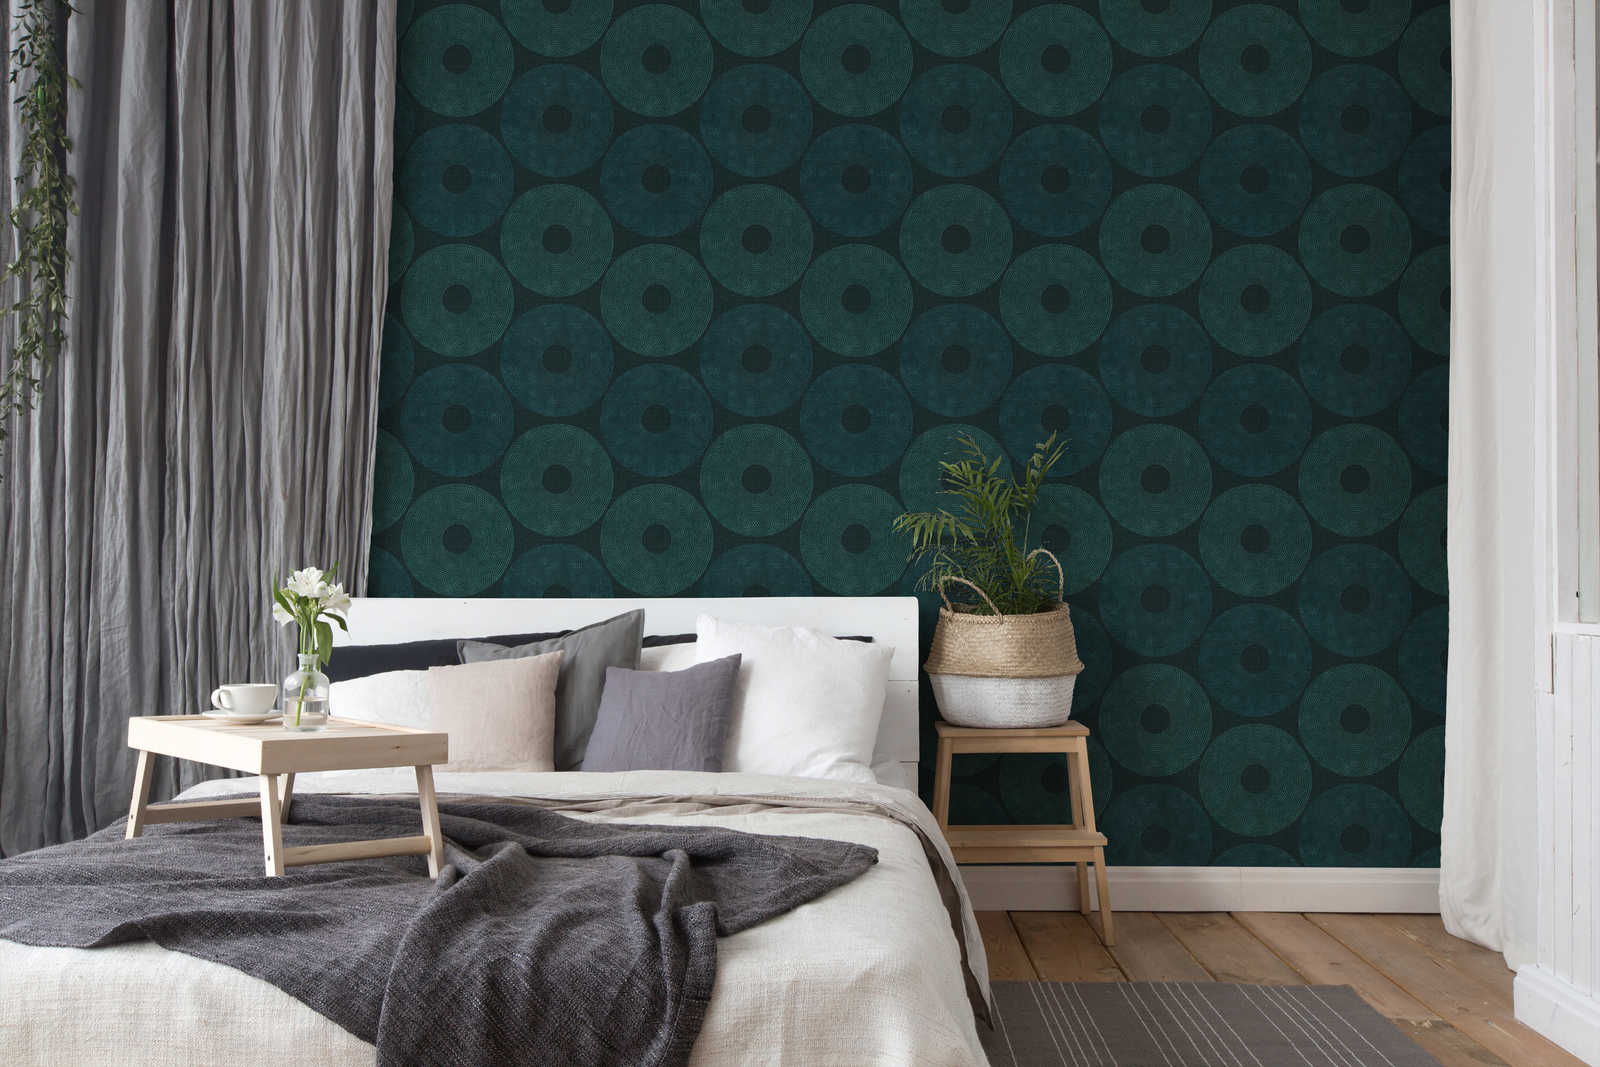             Ethno wallpaper circles with structure design - green, metallic
        